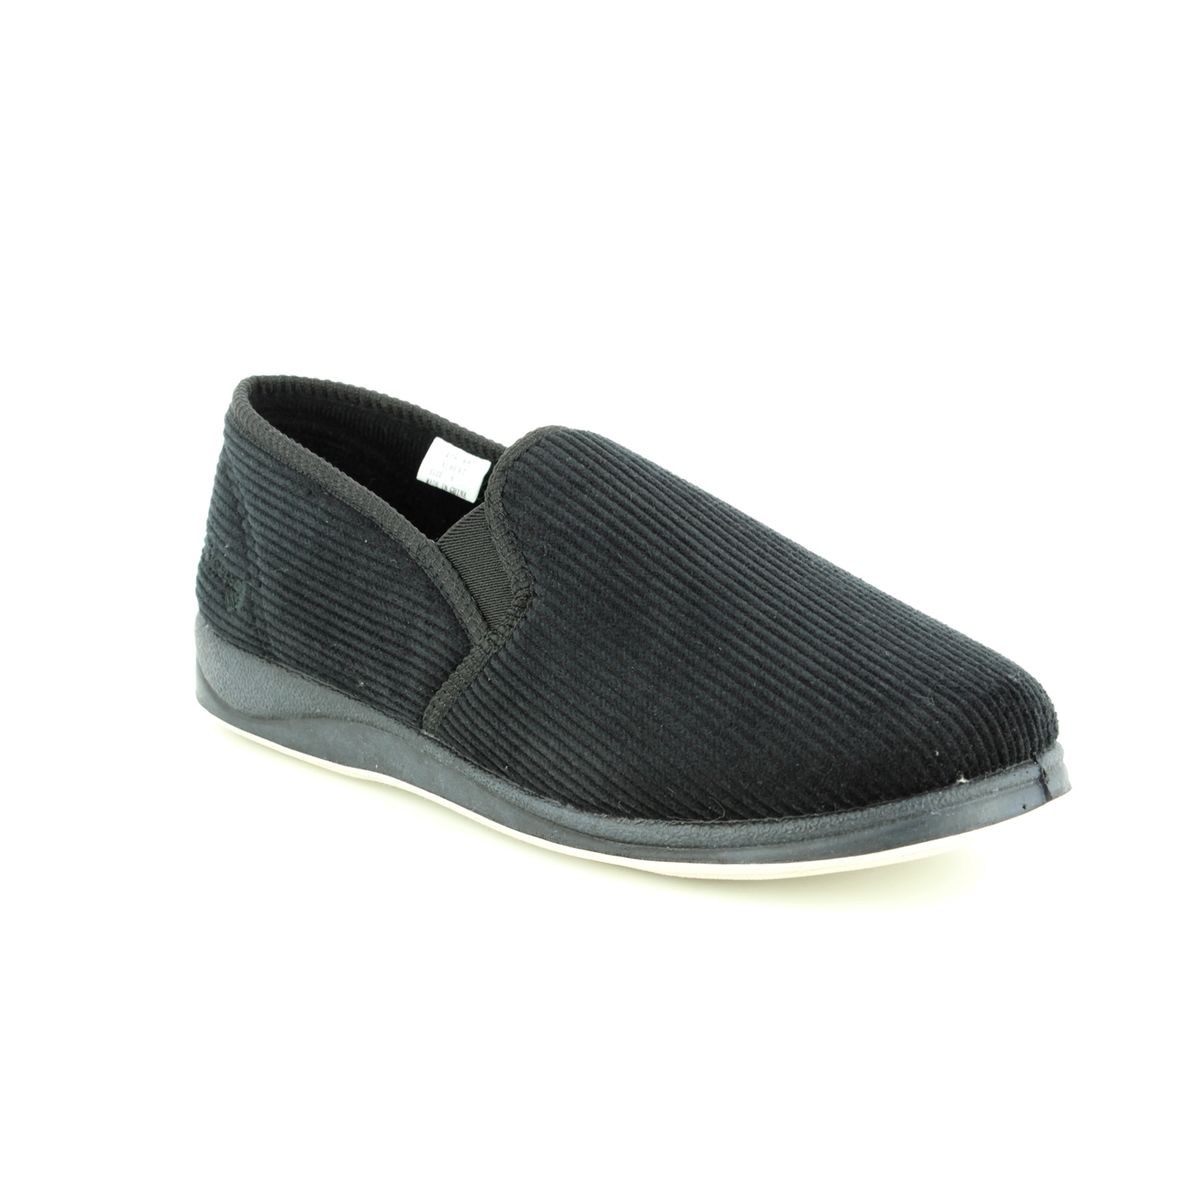 Padders Albert G Fit Black Mens slippers 408S-40 in a Plain Textile in Size 7